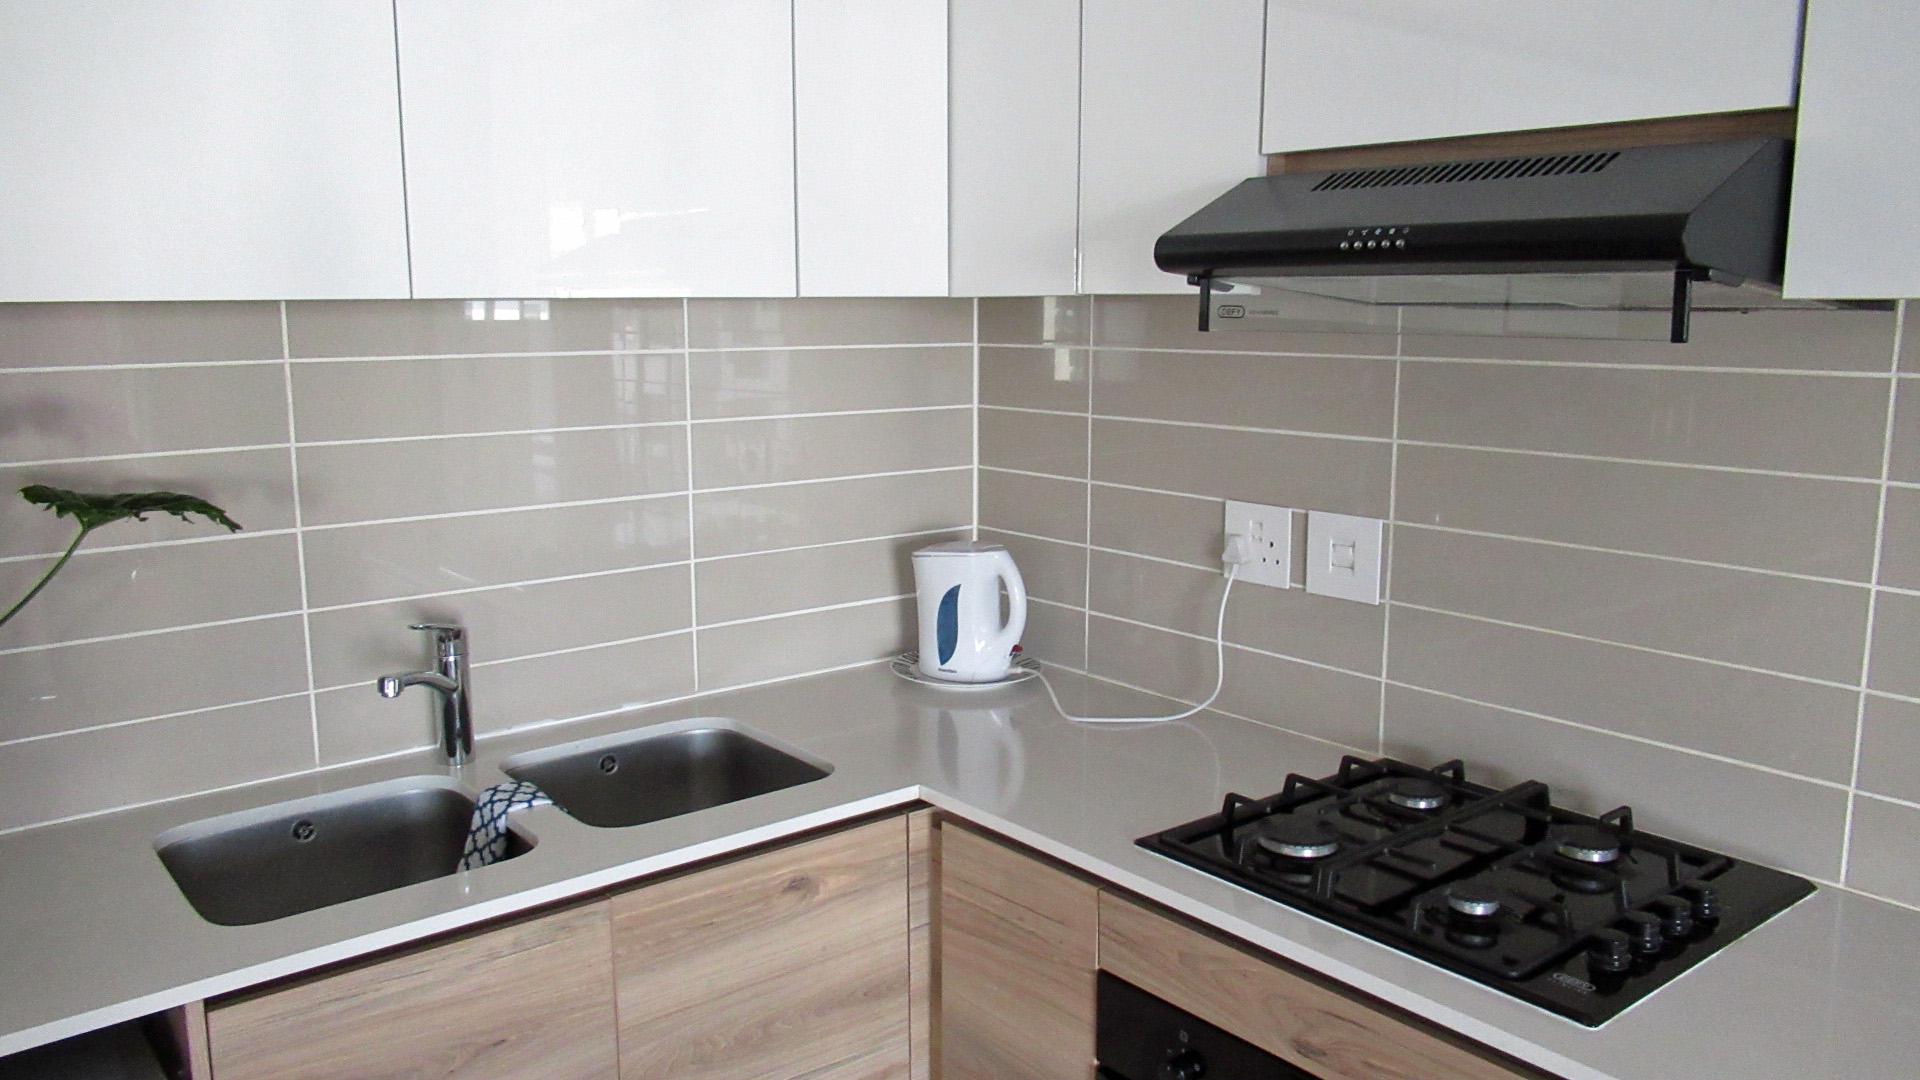 Kitchen - 9 square meters of property in Westlake Eco-Estate